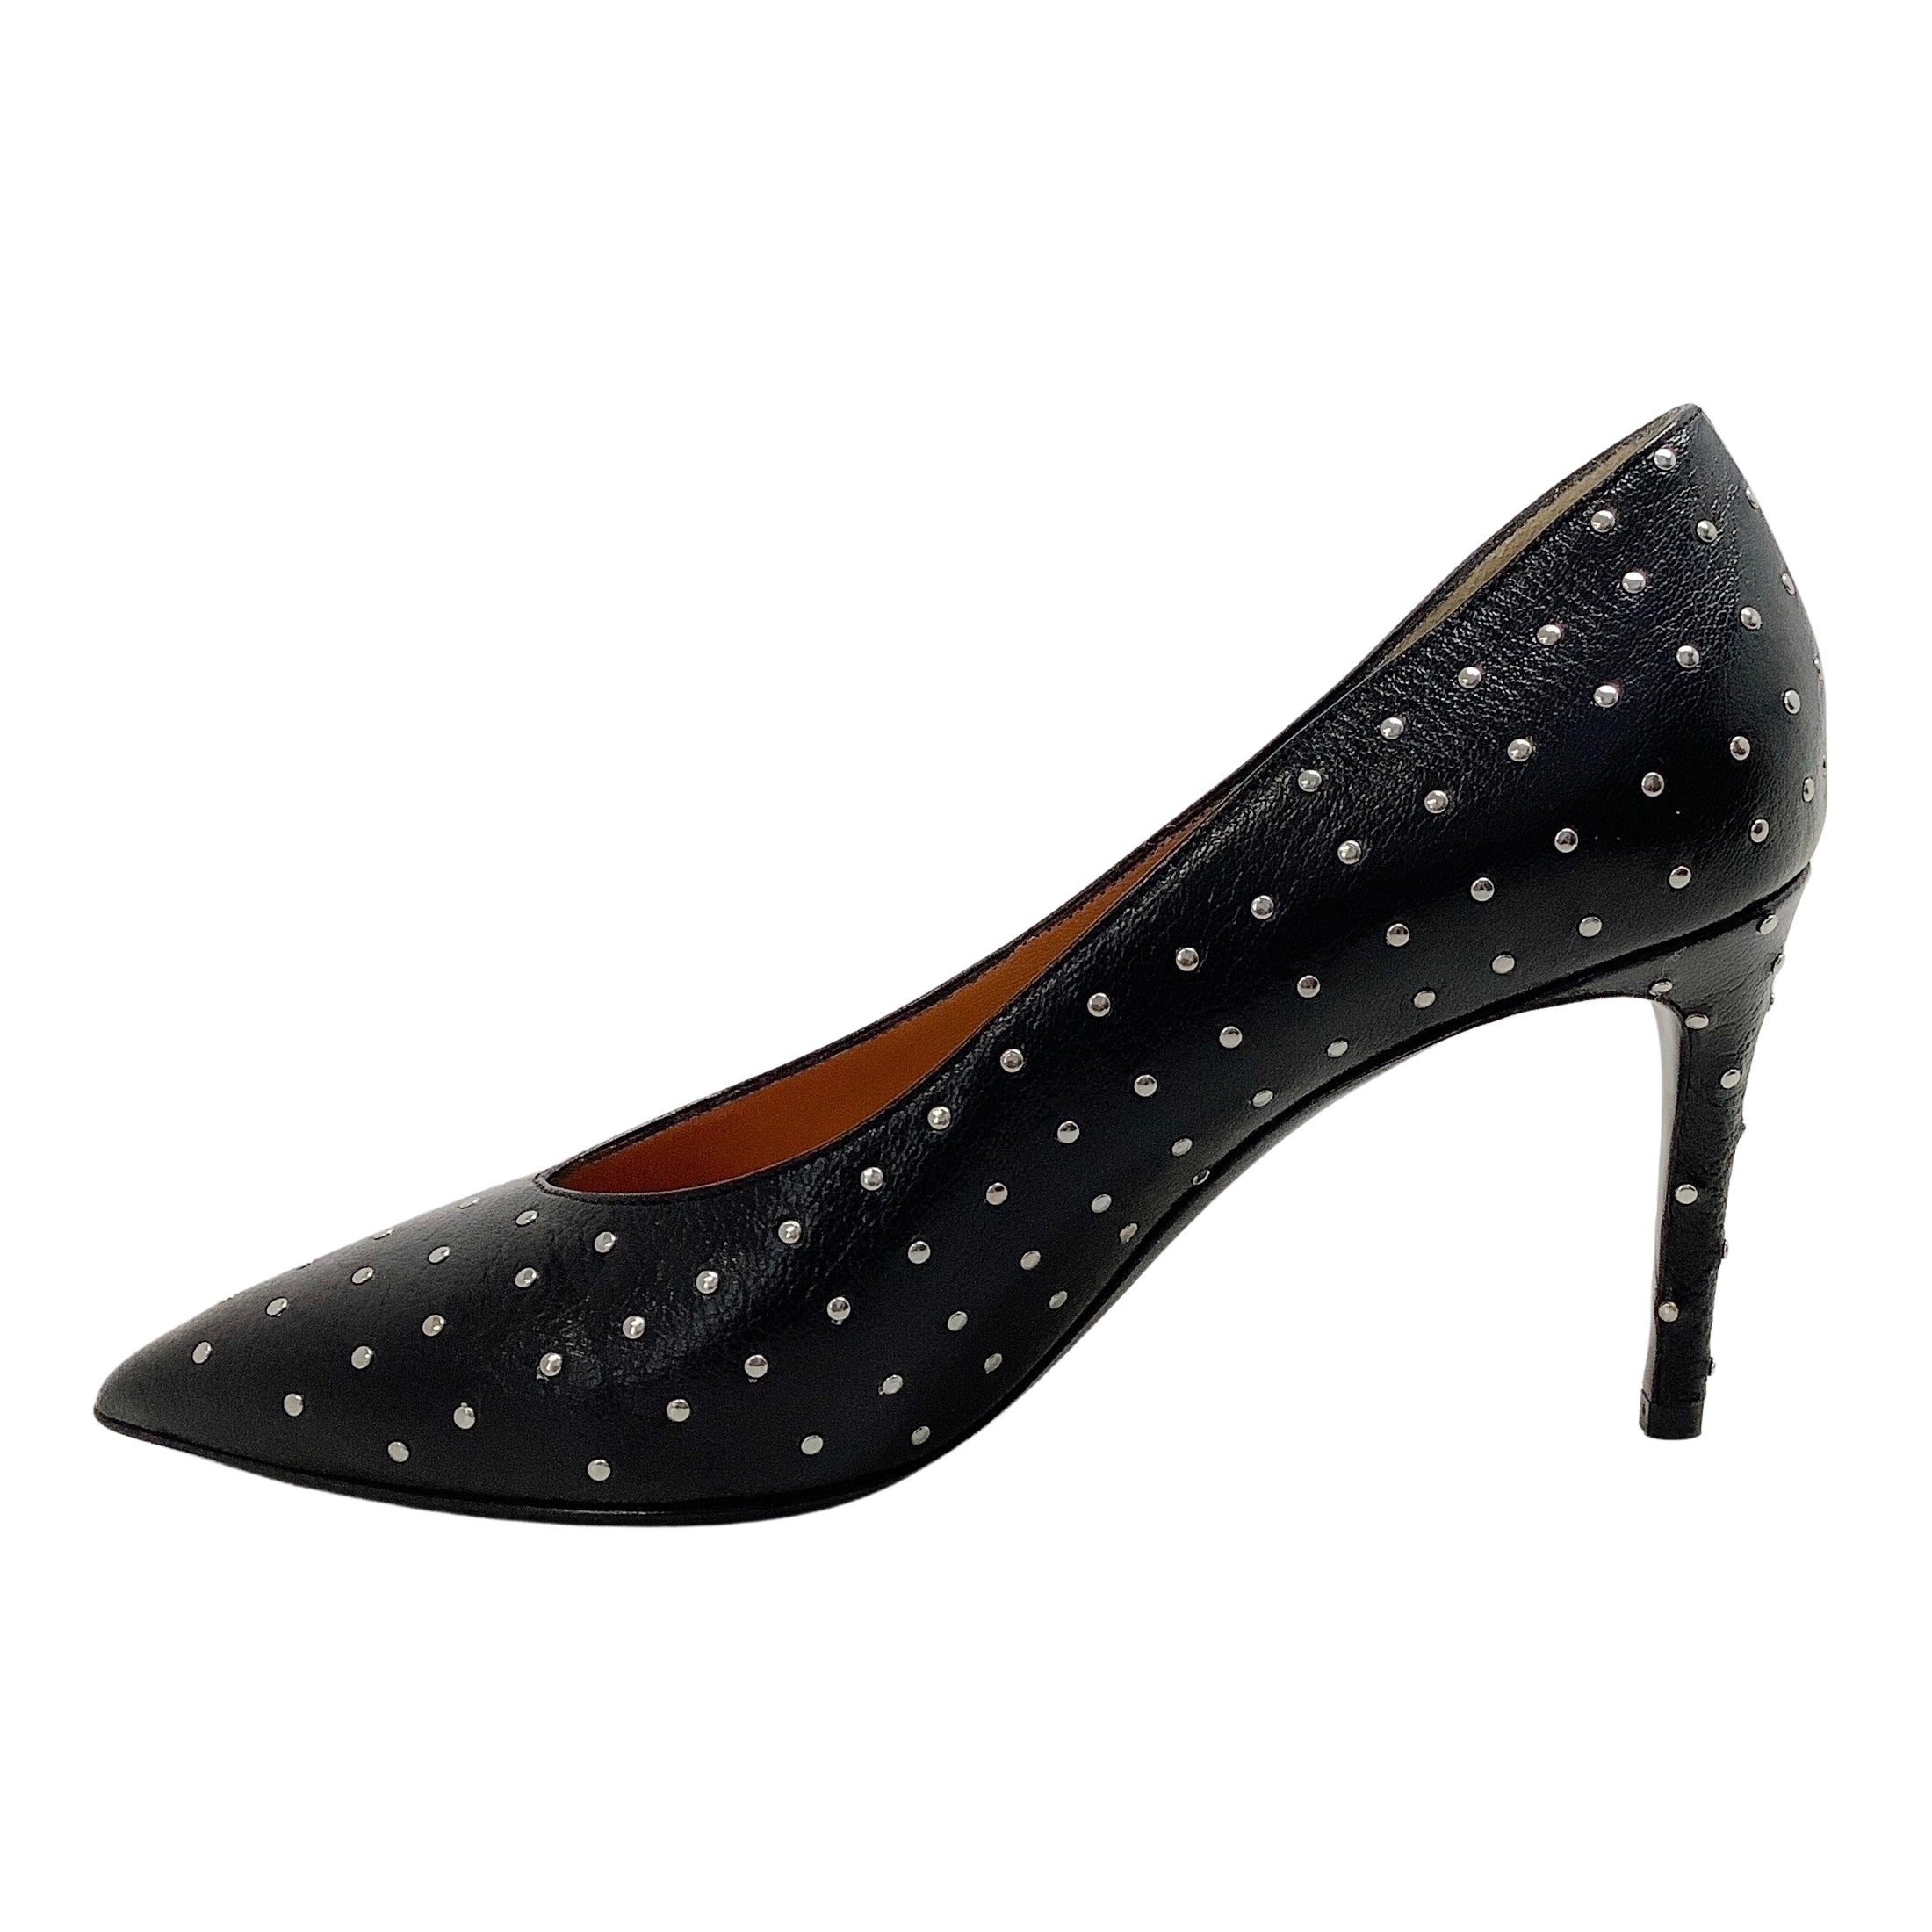 Laurence Dacade Black Leather Vivette 85 Pumps with Silver Studs